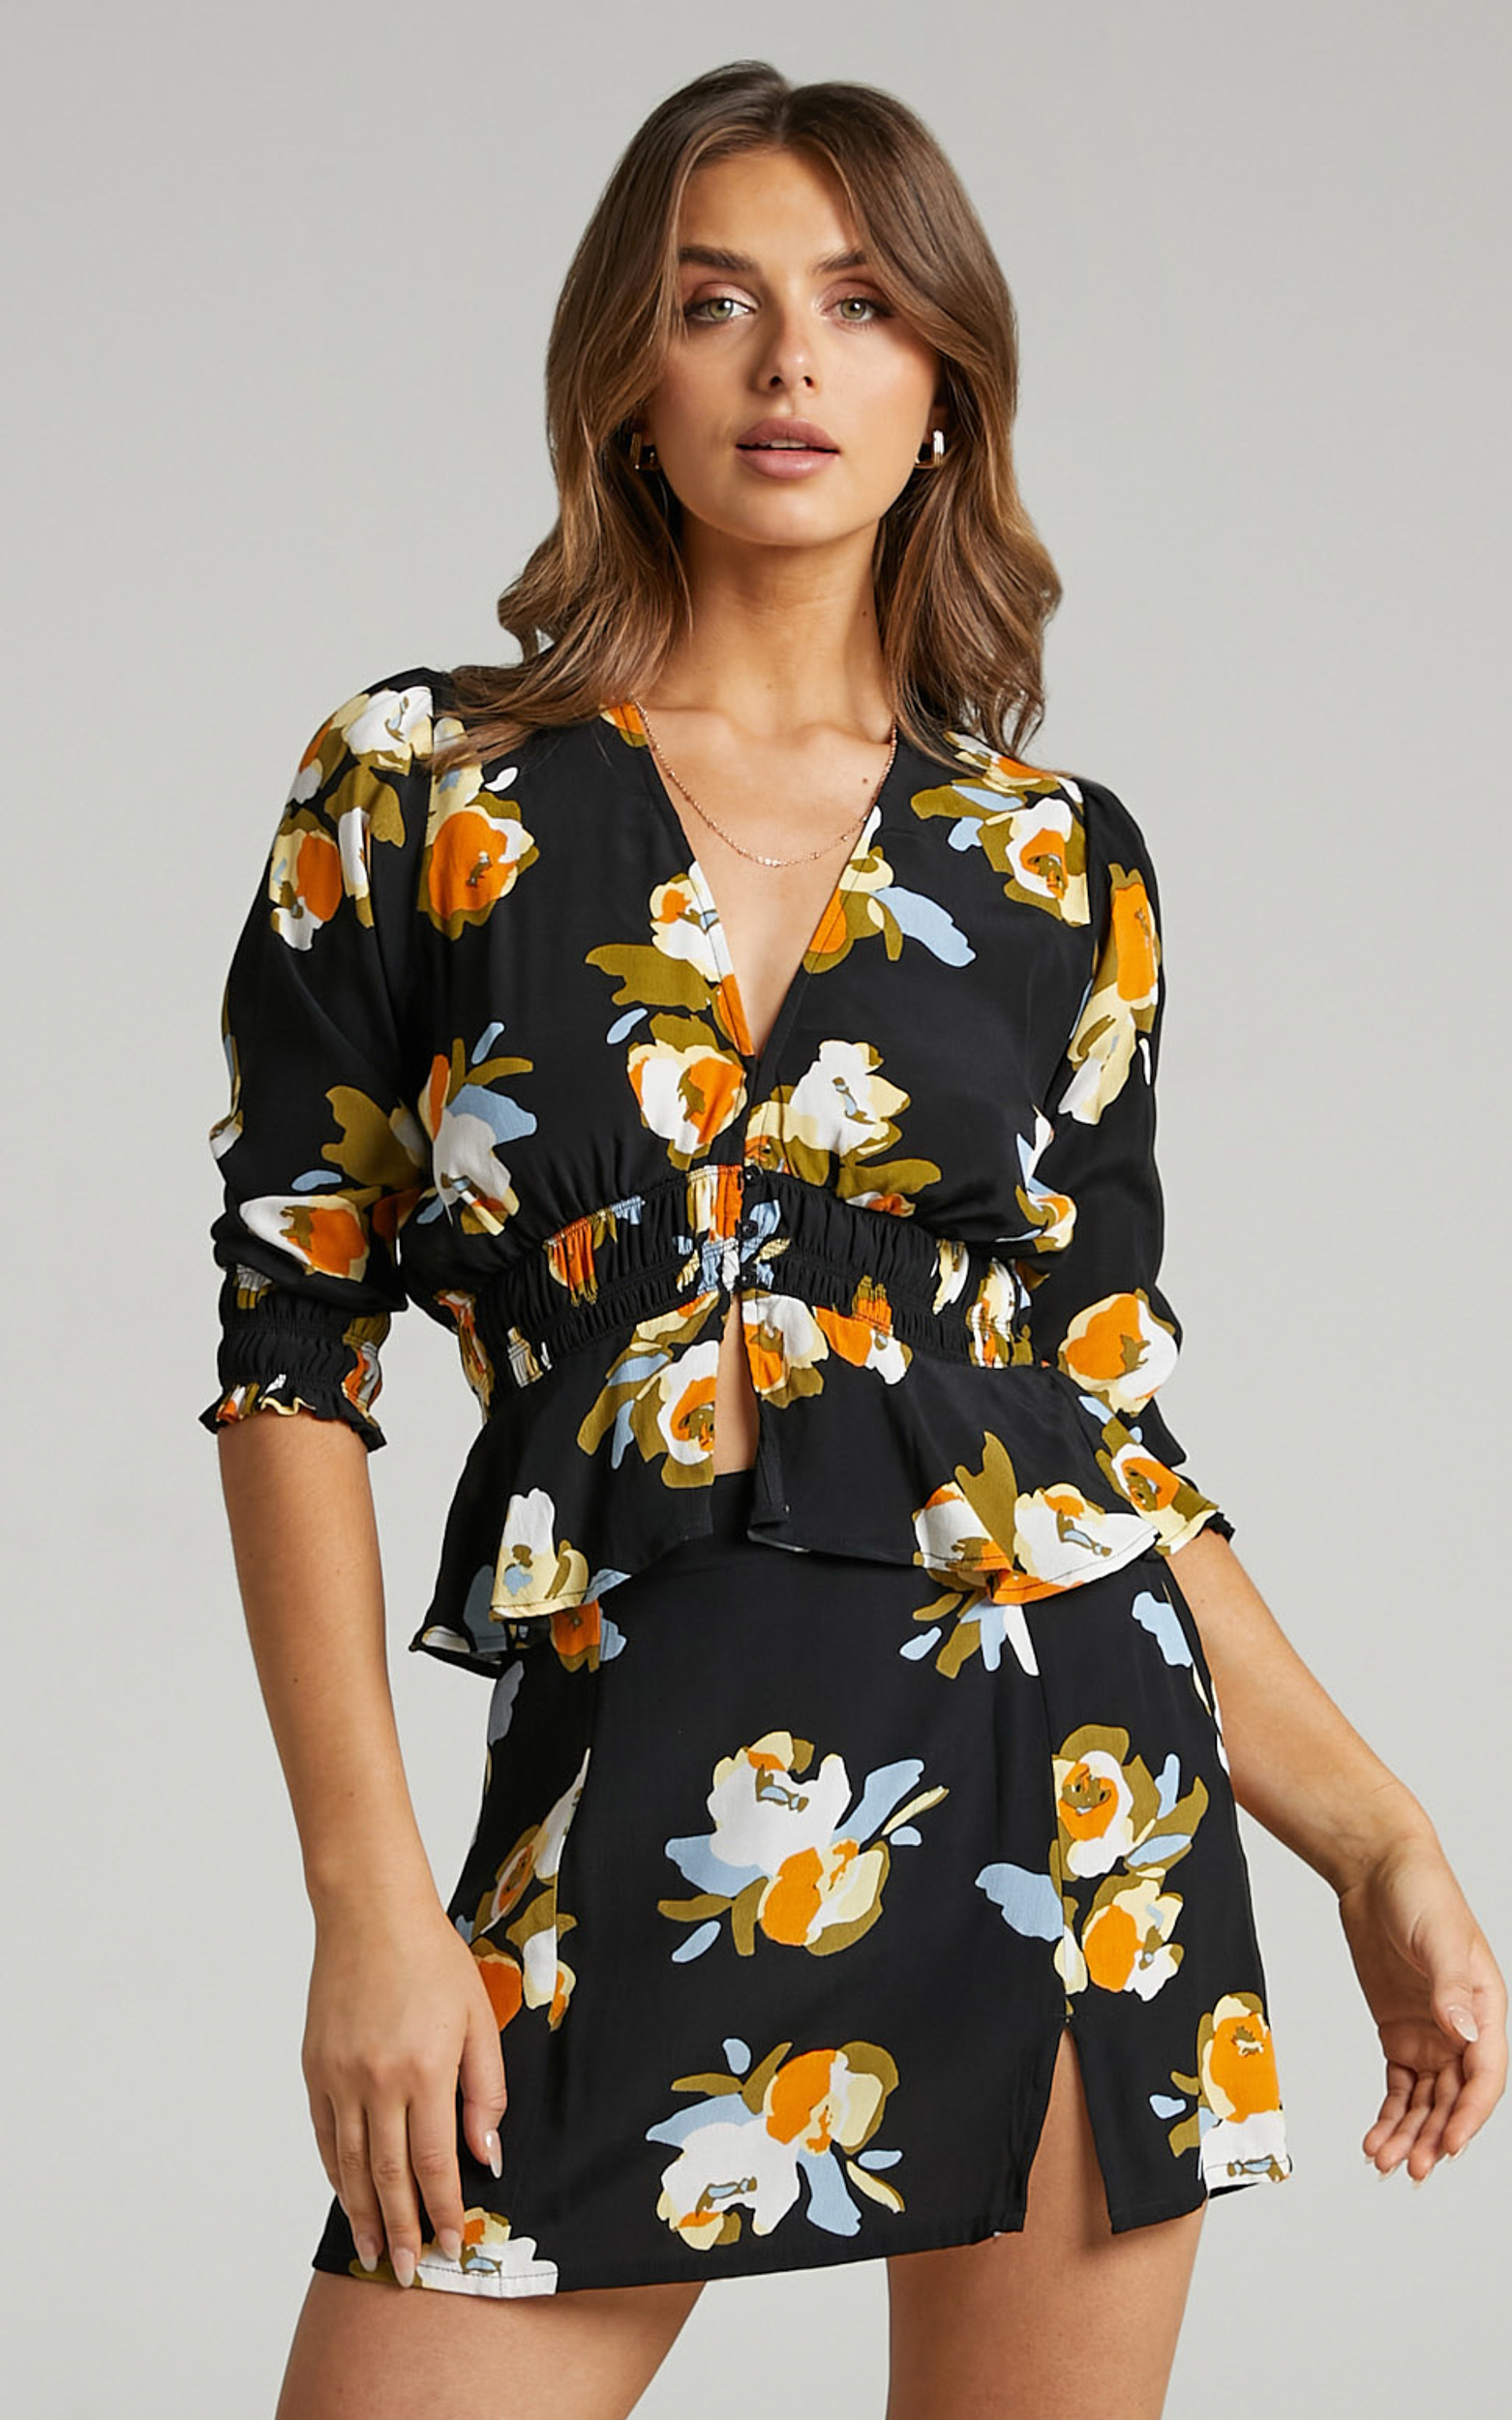 Rue Stiic - Patti Mini Skirt in Marigold Floral - L, BLK1, hi-res image number null